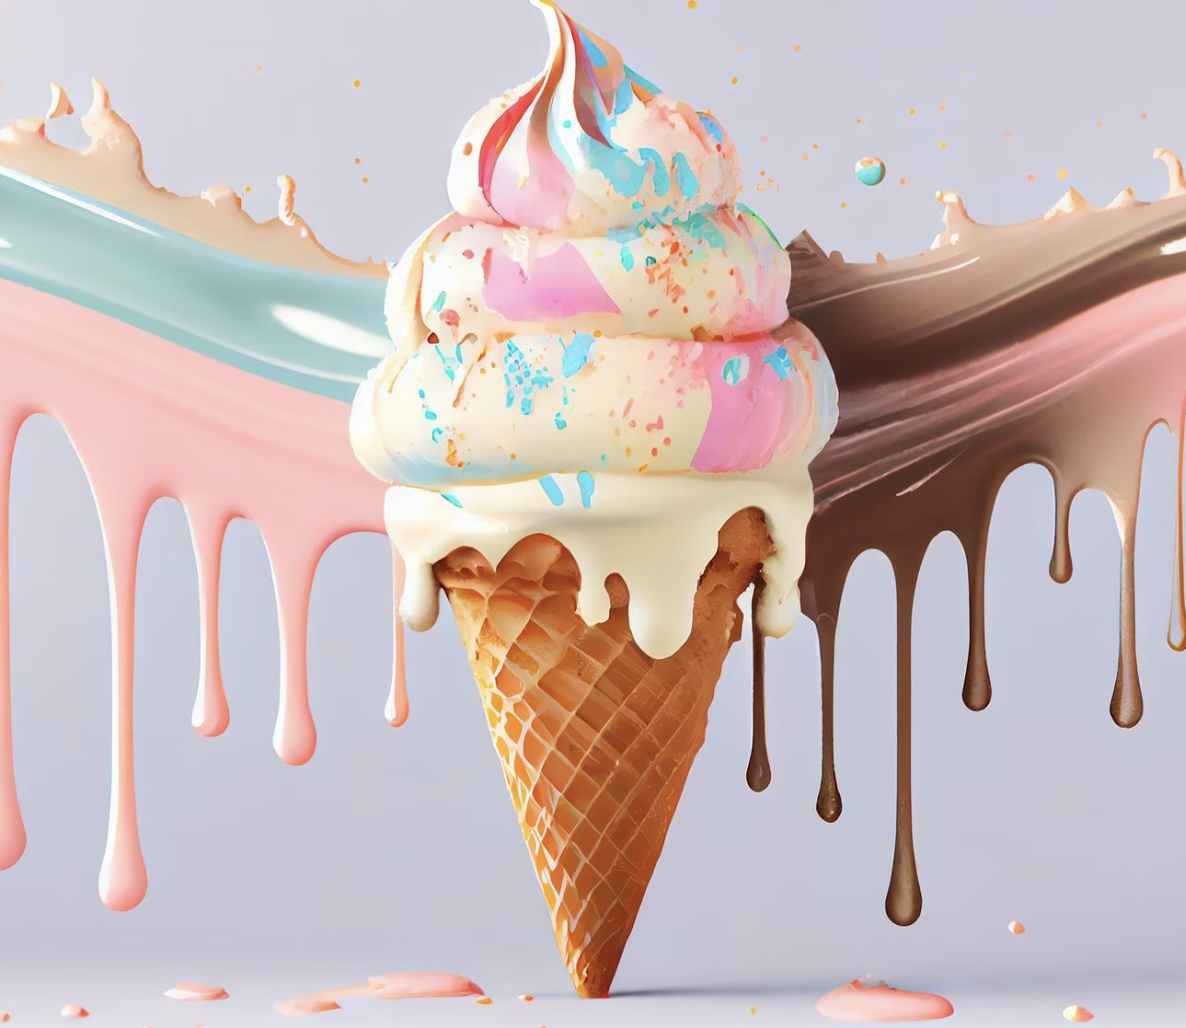 7 Of The Most Popular Ice Cream Flavors In America